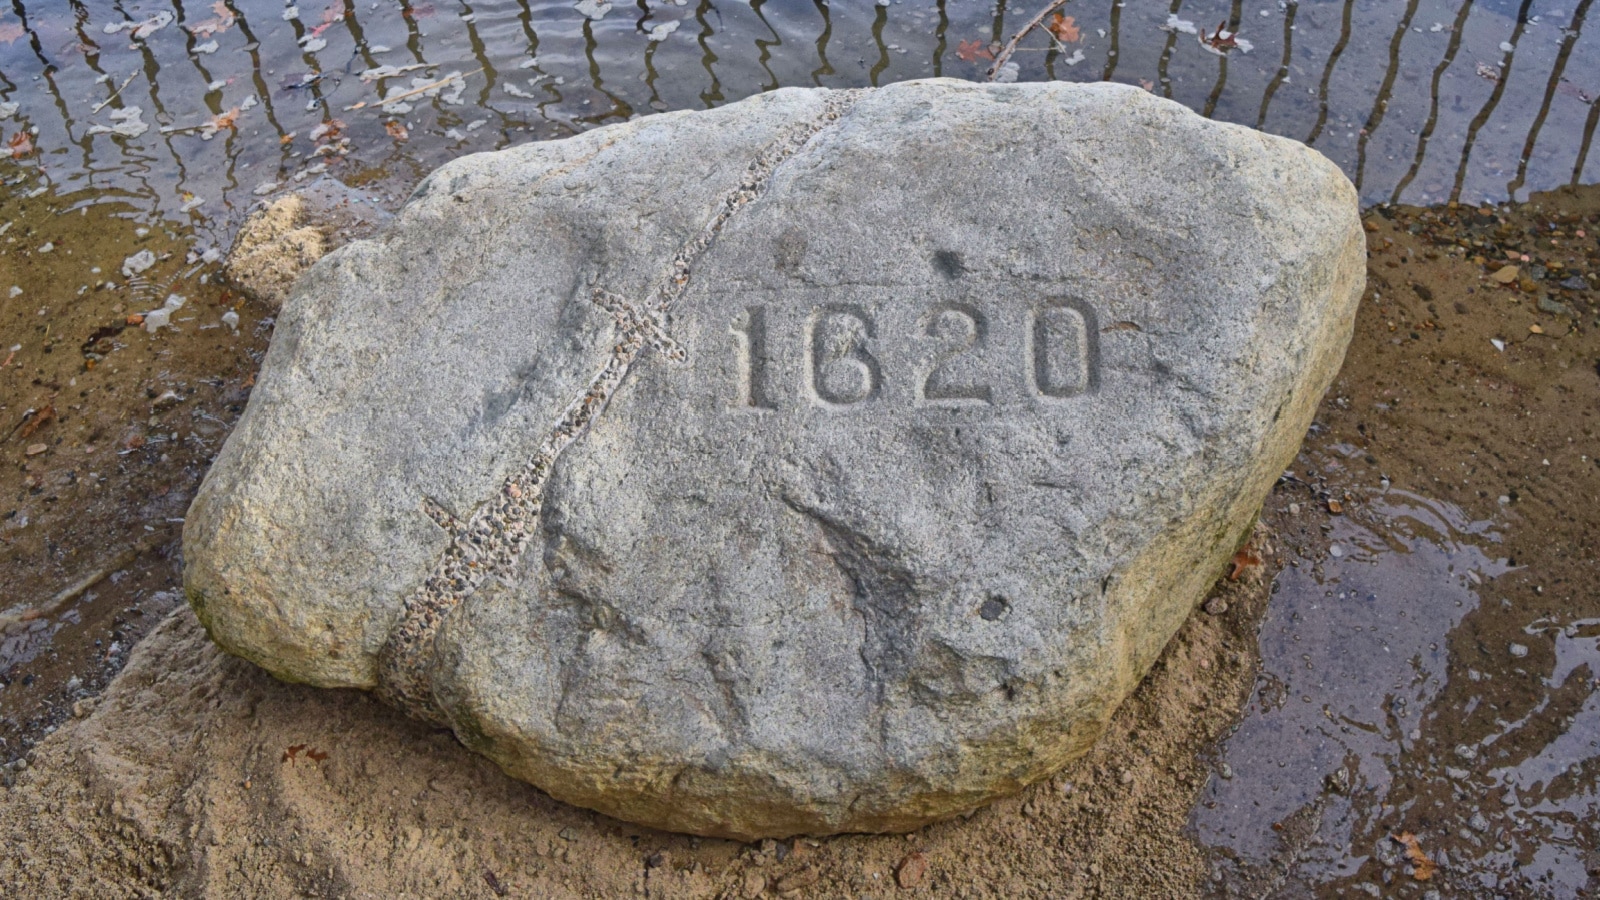 <p>Next up on the list is Plymouth Rock, a supposed symbol of America’s founding history. However, some tourists find it to be nothing more than a rock placed in a hole, with the year 1620 etched onto its surface. On the bright side, viewing this underwhelming landmark is free.</p>